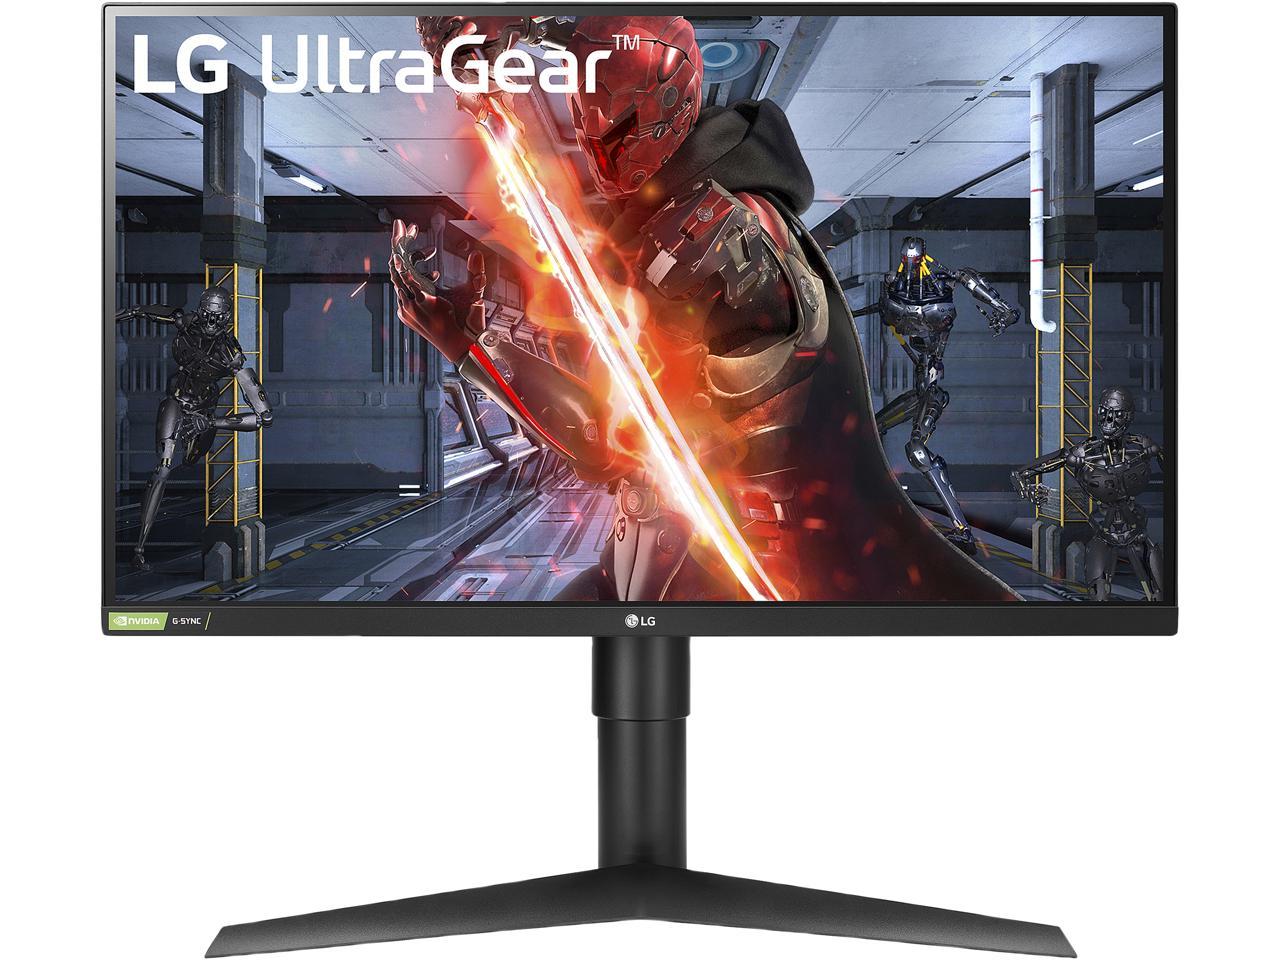 GtG 2560 x 1440 LG UltraGear 27GN800-B 27 Inch Ultragear QHD Response Time / 144Hz Refresh Rate and NVIDIA G-SYNC Compatible with AMD FreeSync Premium Black IPS Gaming Monitor with IPS 1ms 